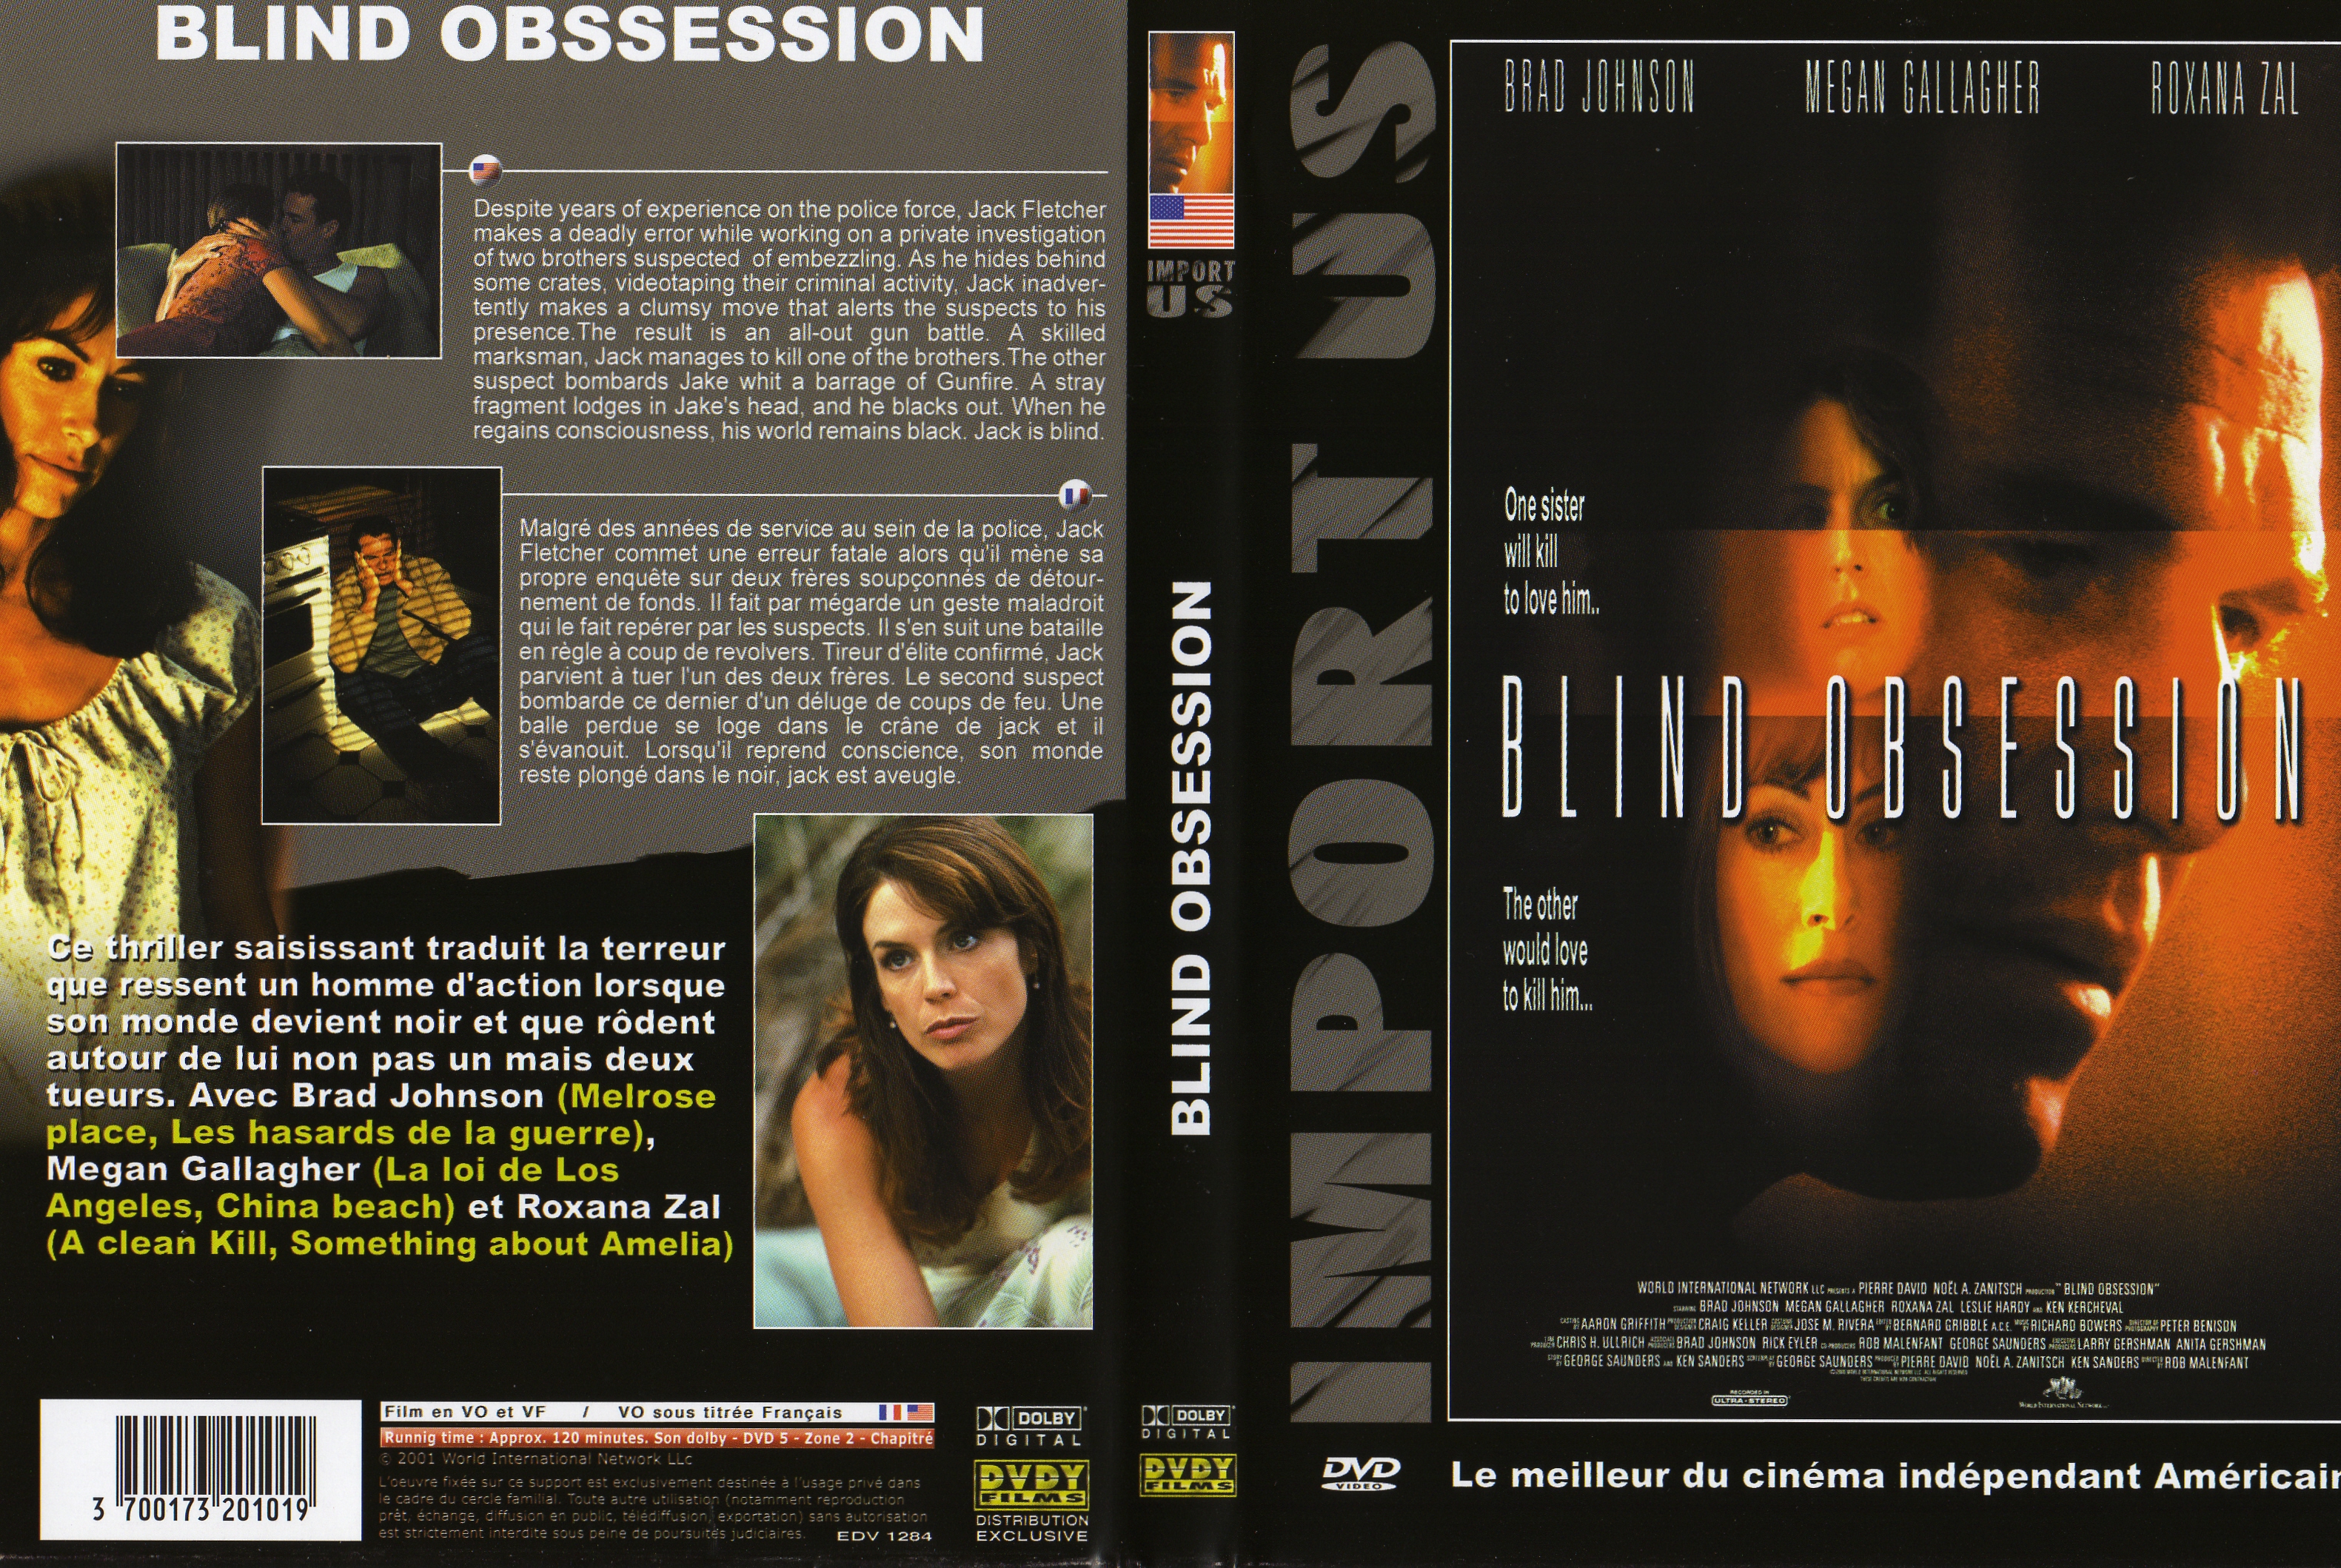 Jaquette DVD Blind obsession